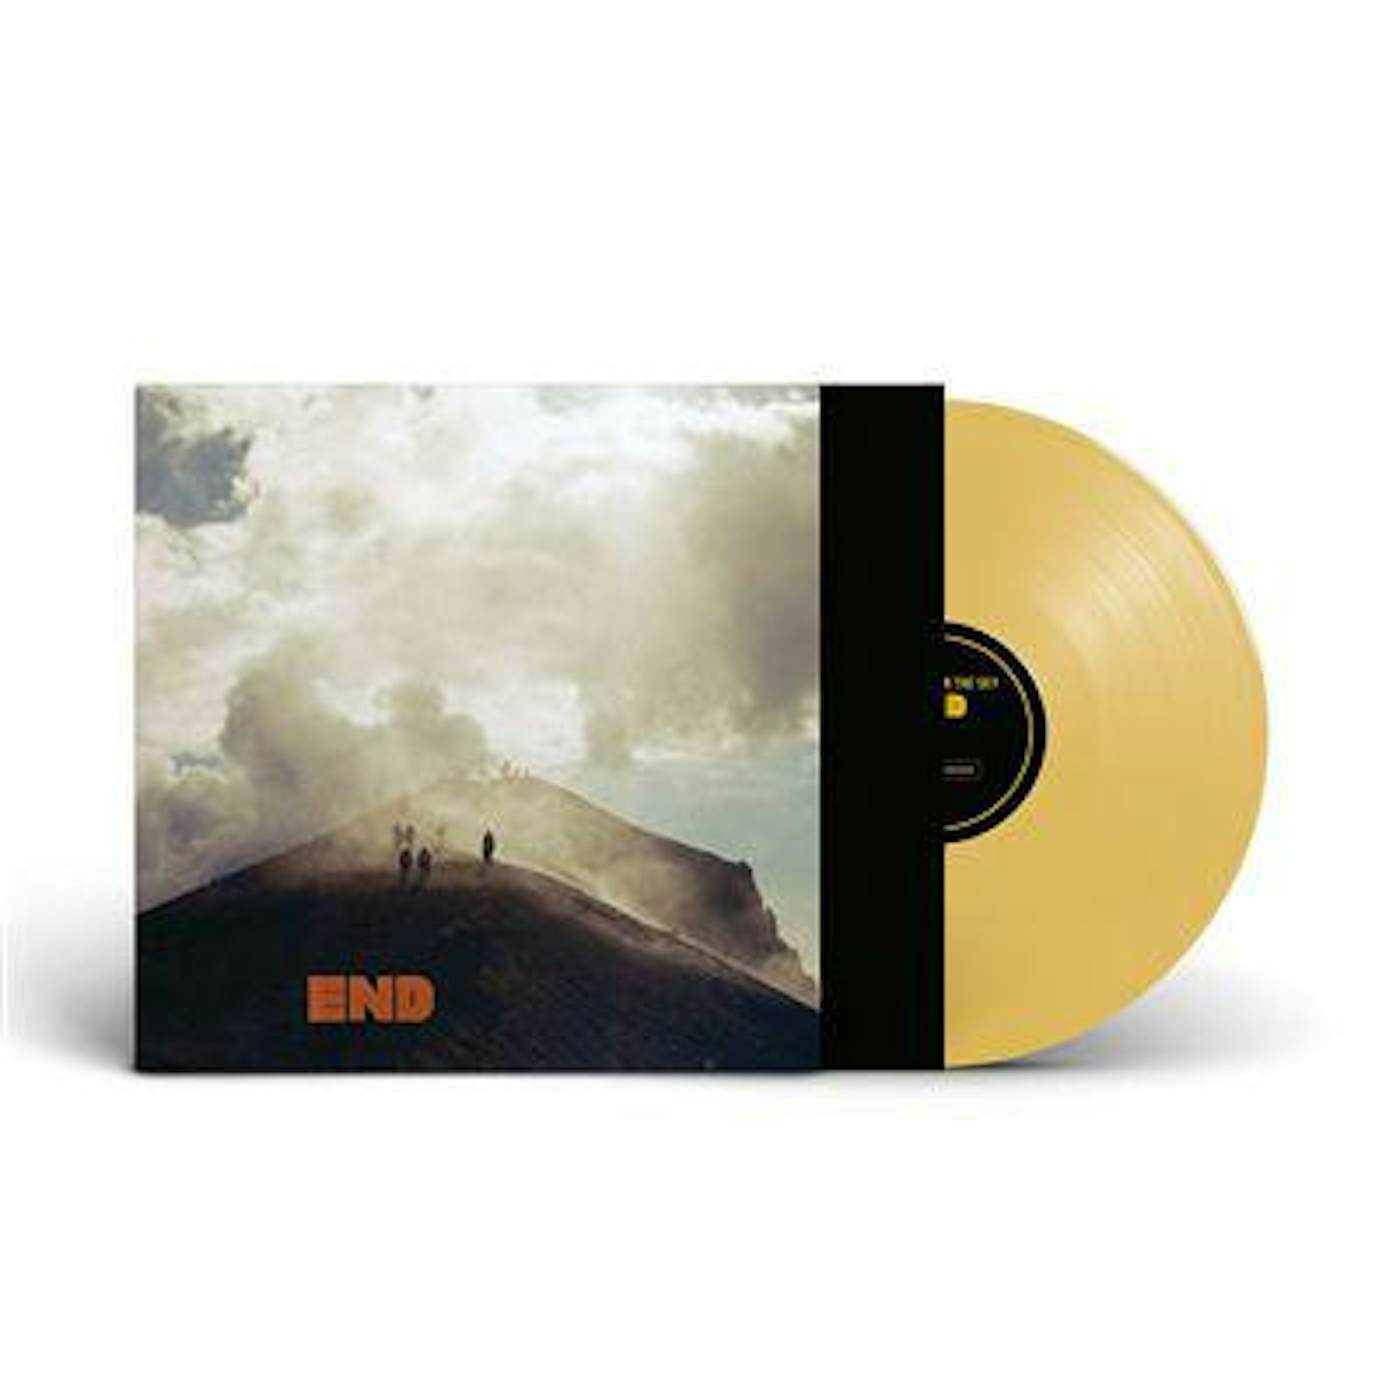 Explosions In The Sky End (Yellow) Vinyl Record